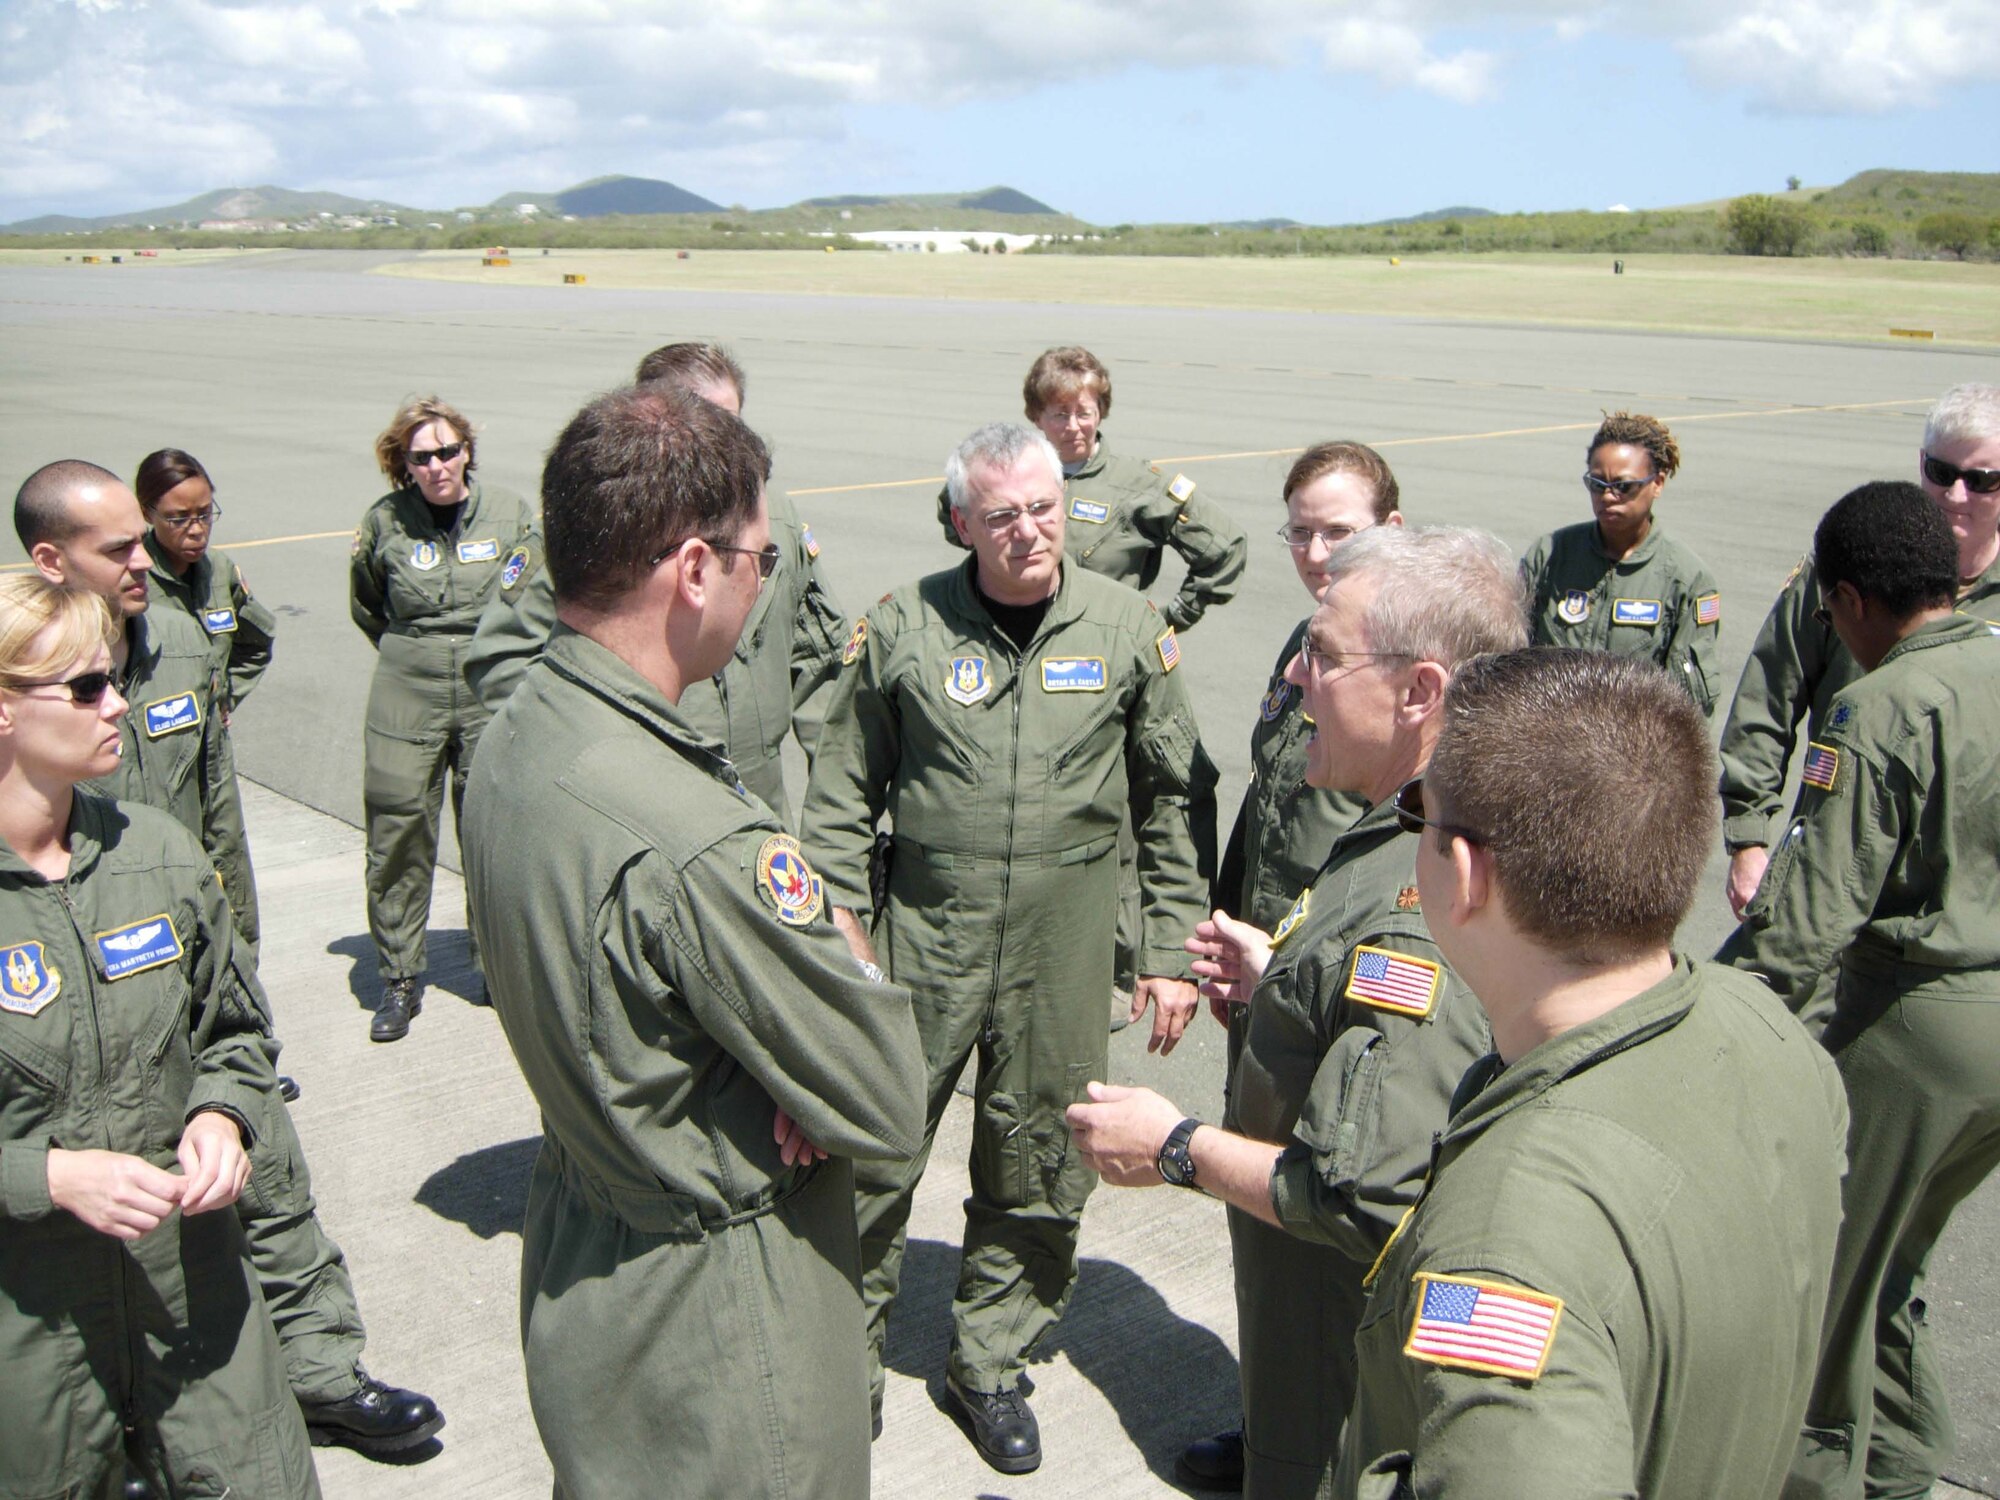 ST. CROIX, U.S. VIRGIN ISLANDS -- Members of the 439th Aeromedical Evacuation Squadron and the 459th Aeromedical Evacuation Squadron gather to review their demonstrated emergency evacuation of a KC-135 Stratotanker following a simulated in-flight emergency. Ten members of the 439th AES joined more than a dozen 459th AES members in a blended AE training mission to the island. Mission training expanded beyond the medical realm to include air refueling and an overseas sortie. (U.S. Air Force photo/Staff Sgt. Amaani Lyle)